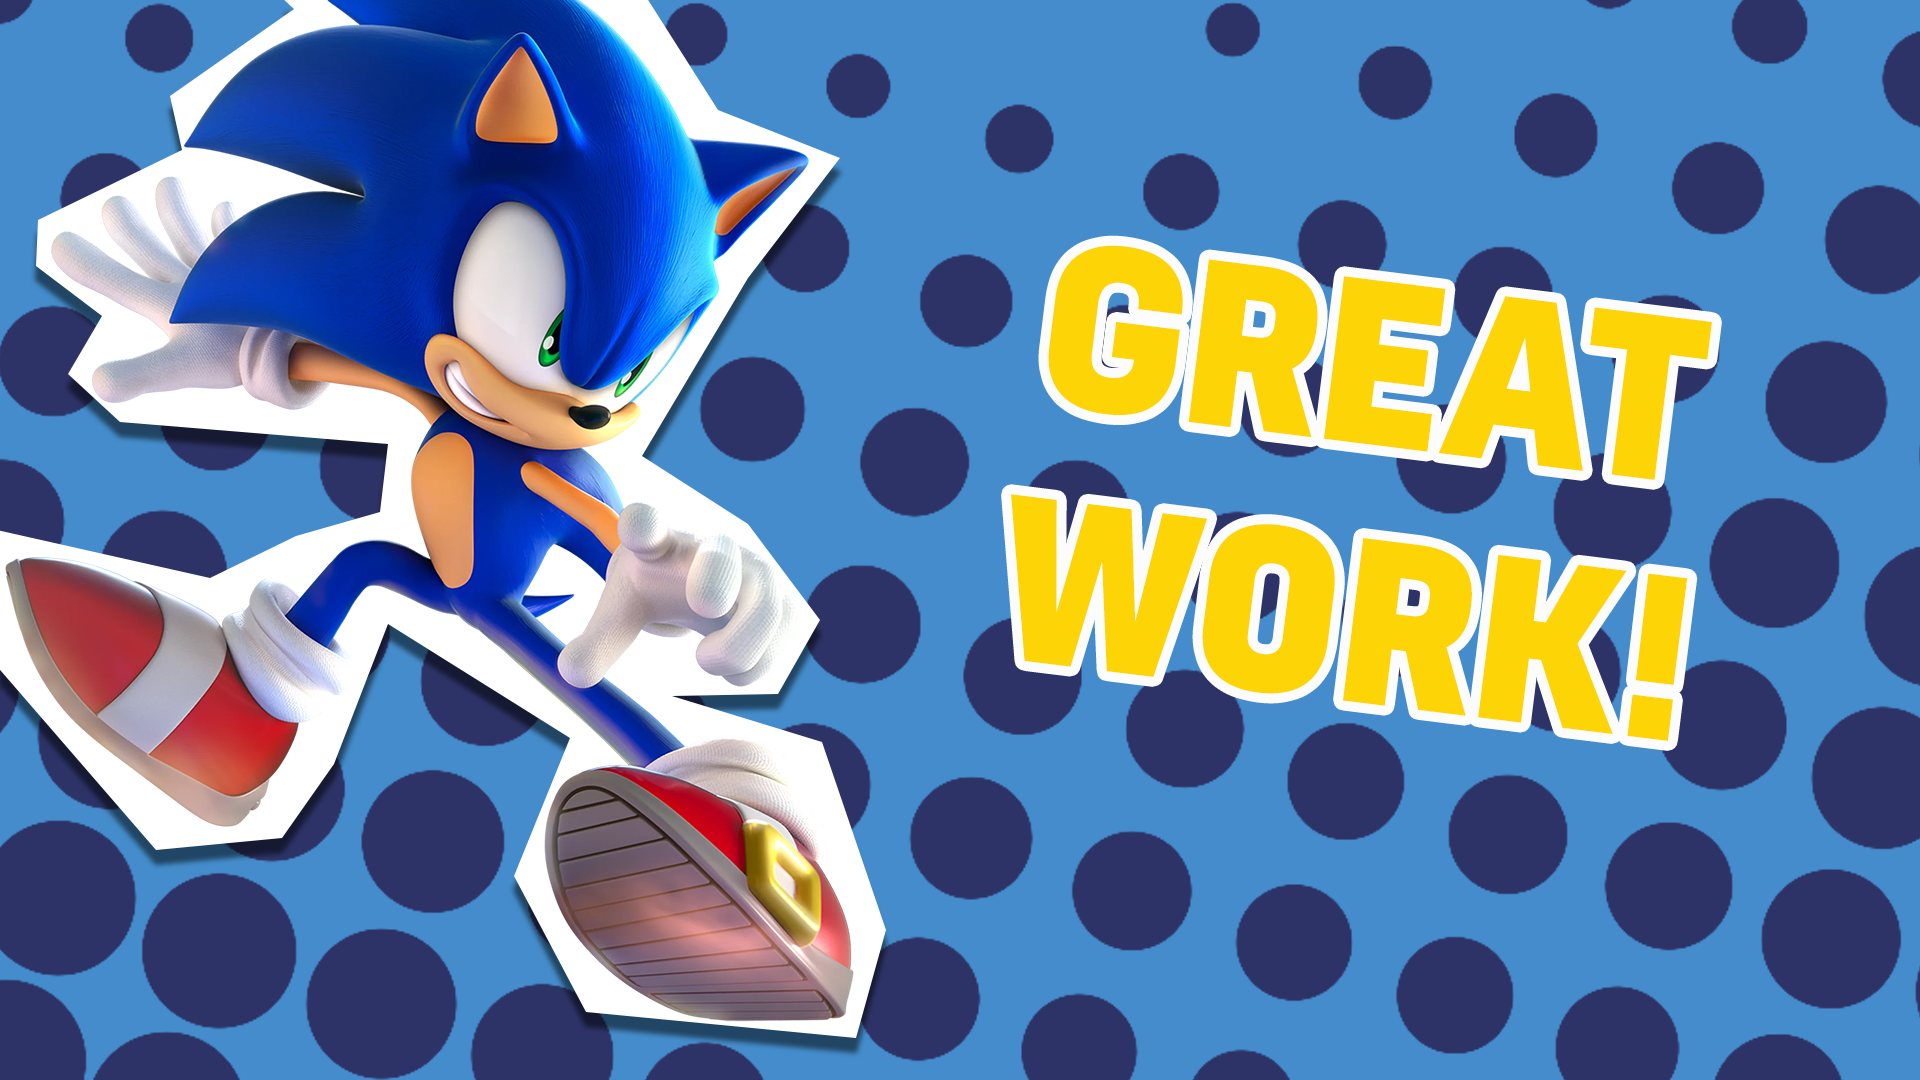 Nice! We can tell you love Sonic! But you're not QUITE a top expert yet - can you get 100% next time?